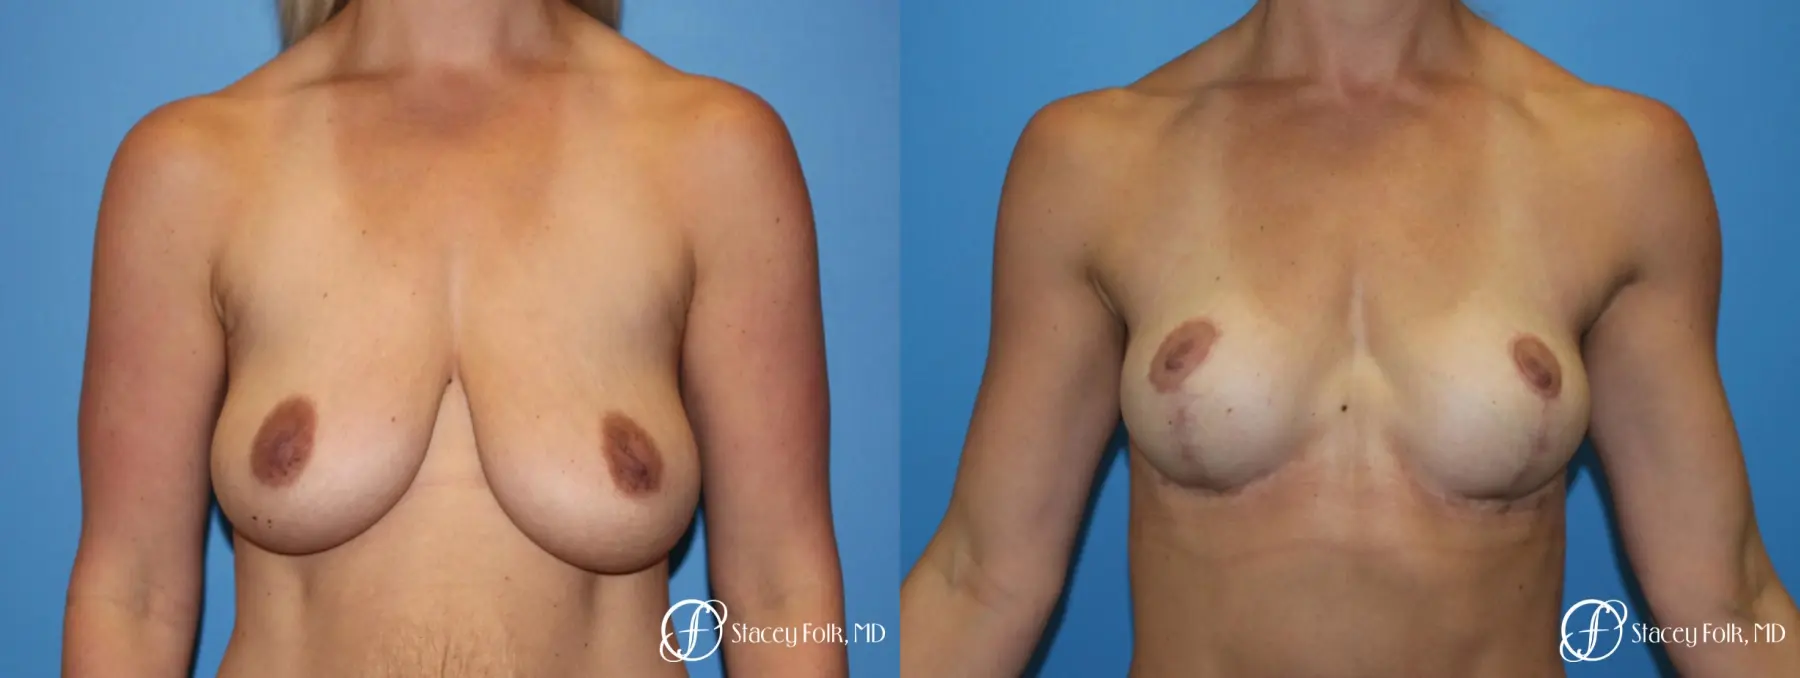 Denver Breast Lift - Mastopexy 8297 - Before and After